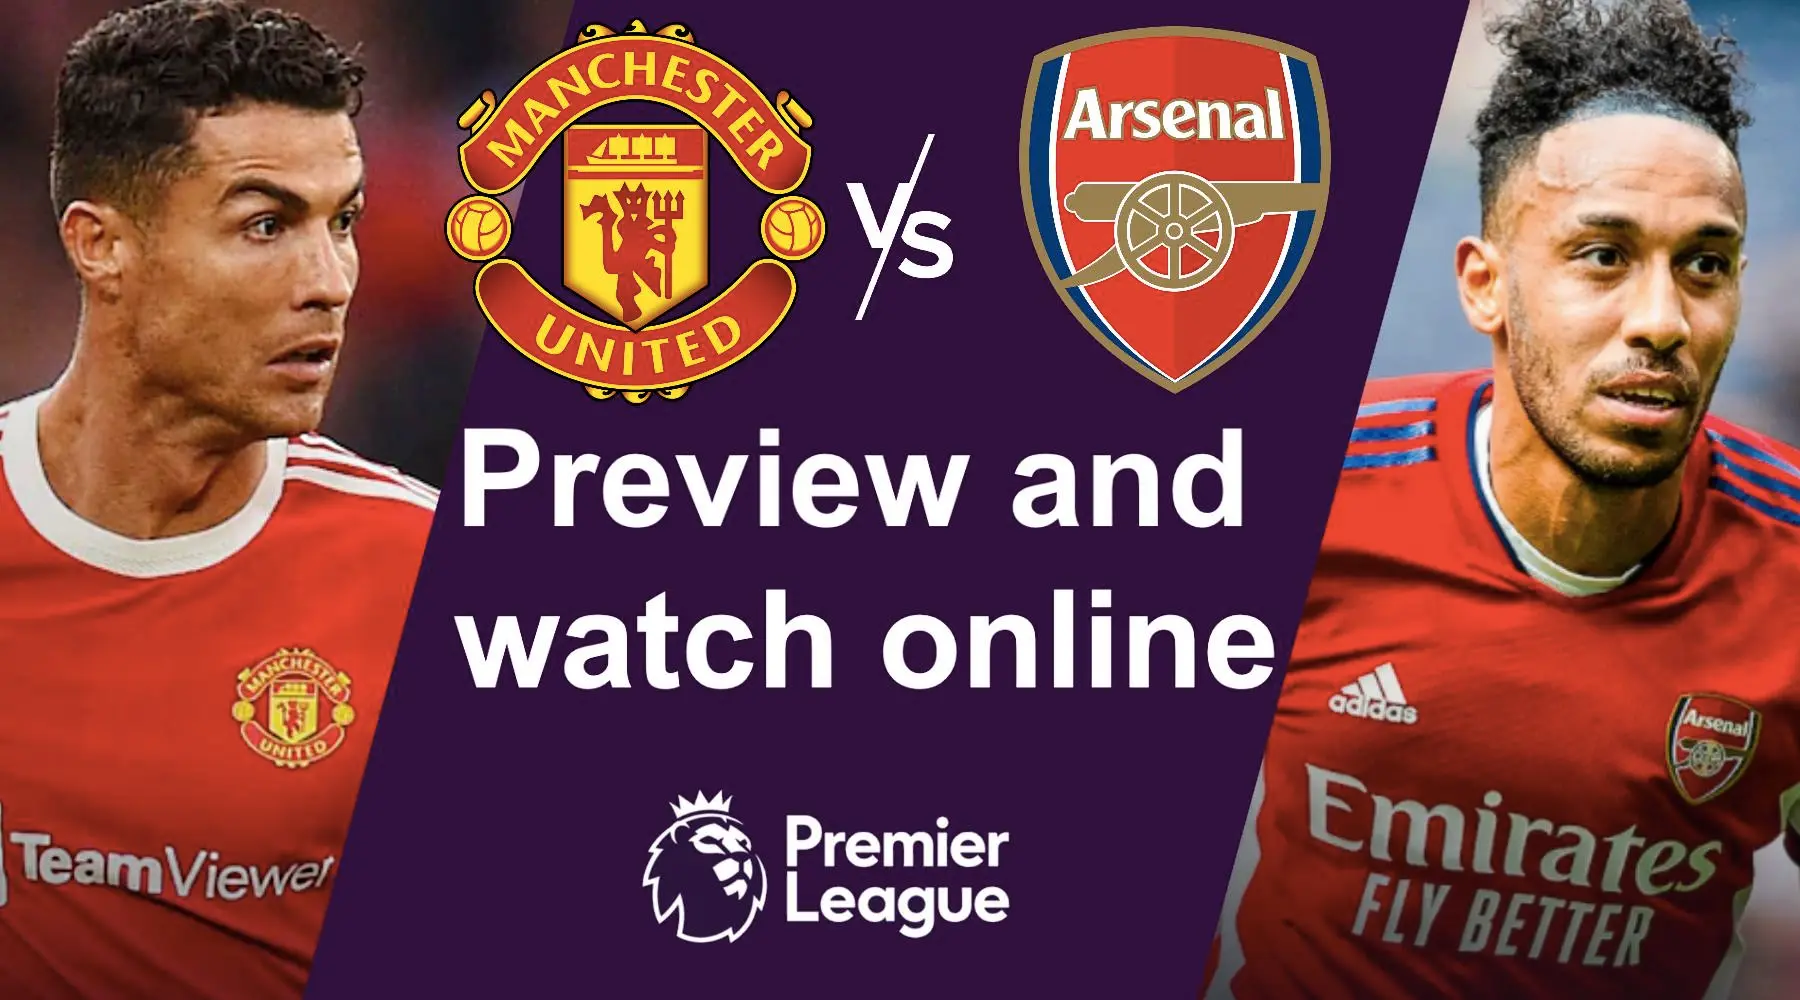 How to watch Man United vs Arsenal Premier League live